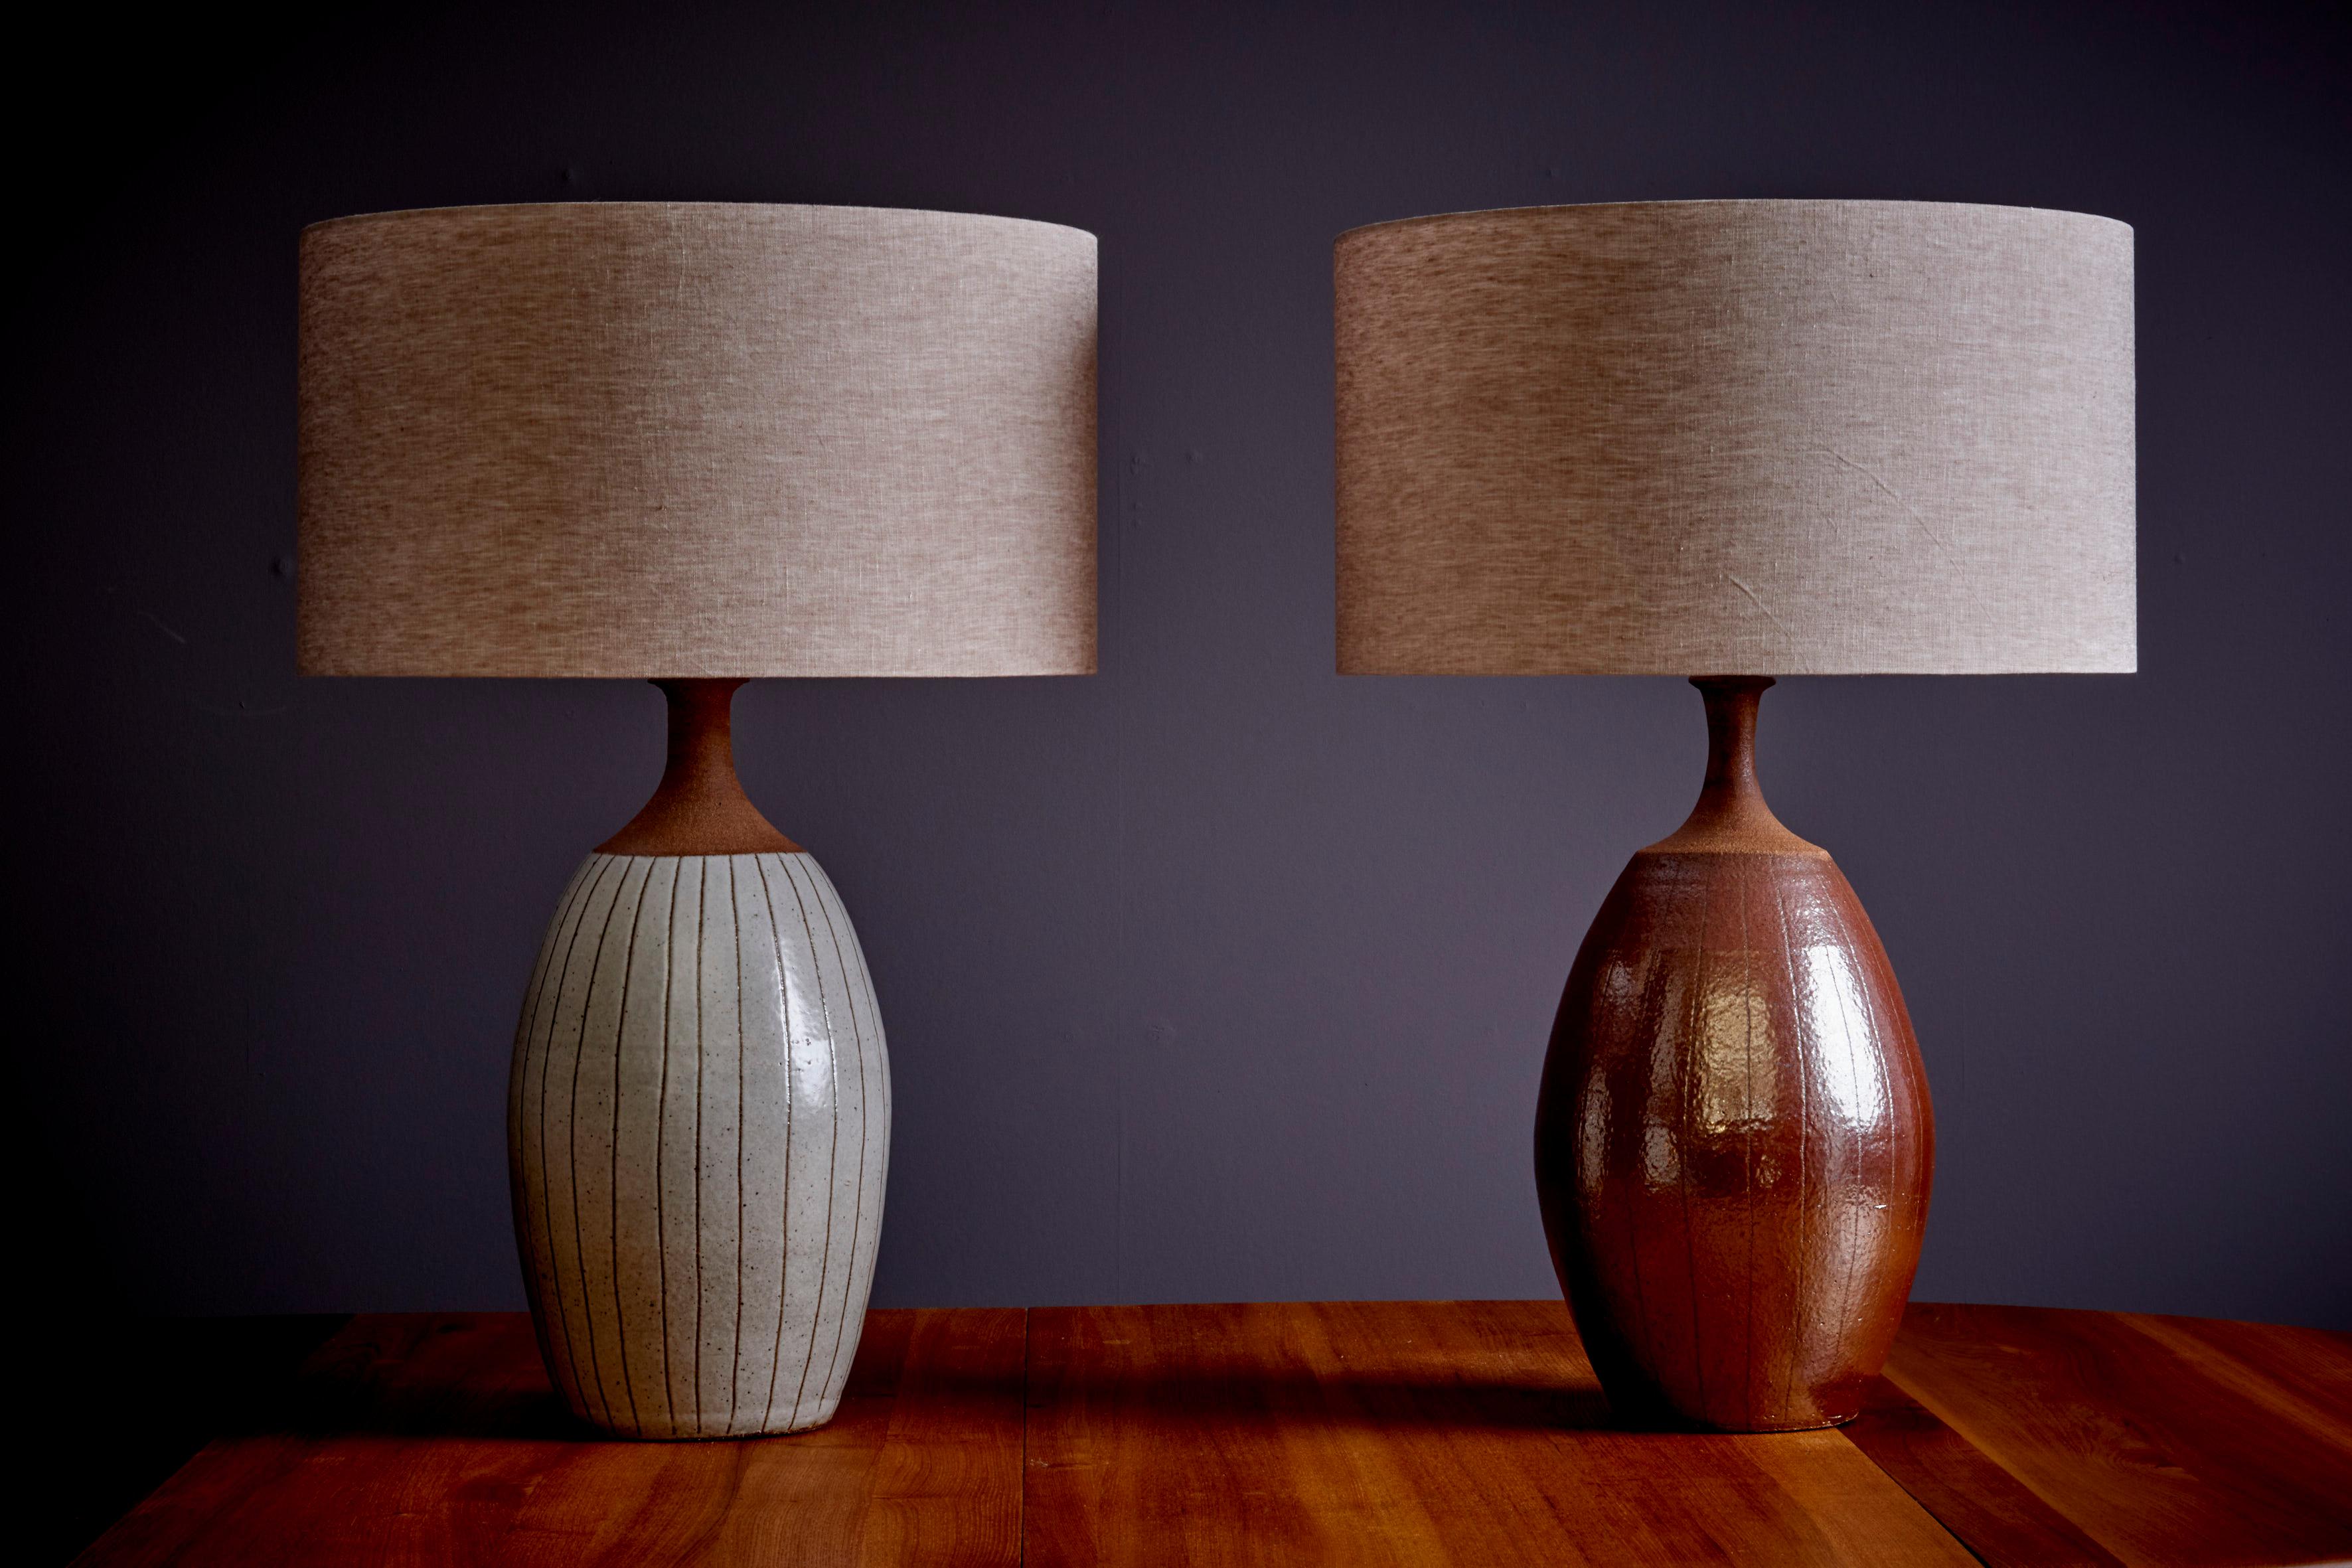 Brent Bennett Pair of Table Lamps in brown and off-white ceramic, USA - 2022. The measurements given apply to the lamp with the shade. The lamp base measures 53cm in height. 